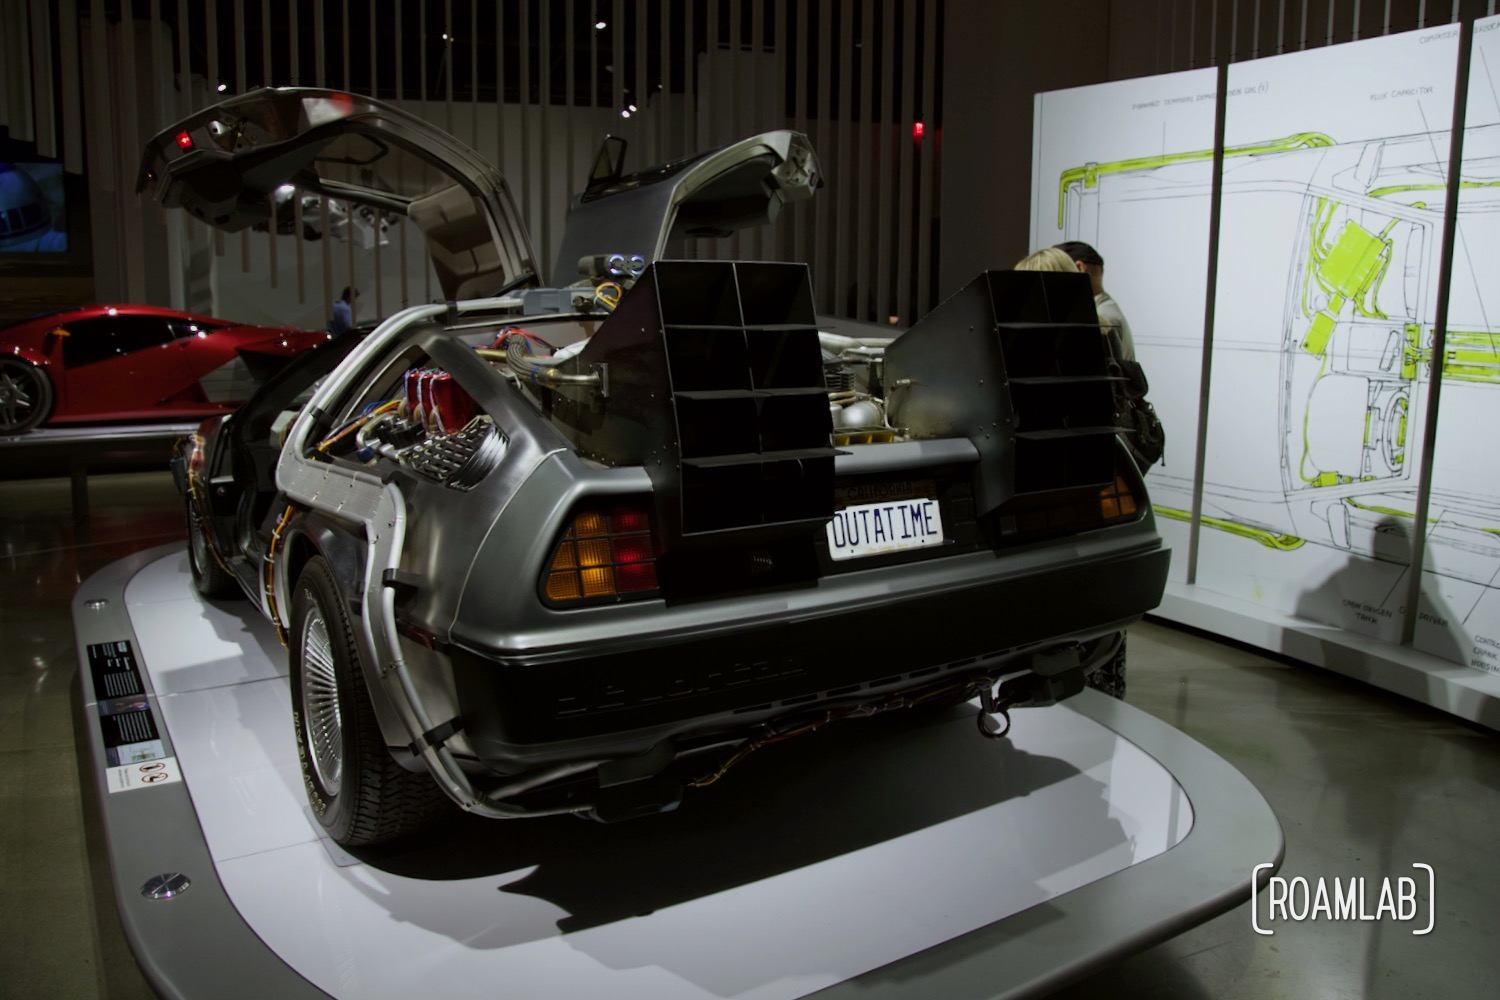 Rear view of the 1981 DeLorean "Time Machine" from Back to the Future on display at the Petersen Automotive Museum.